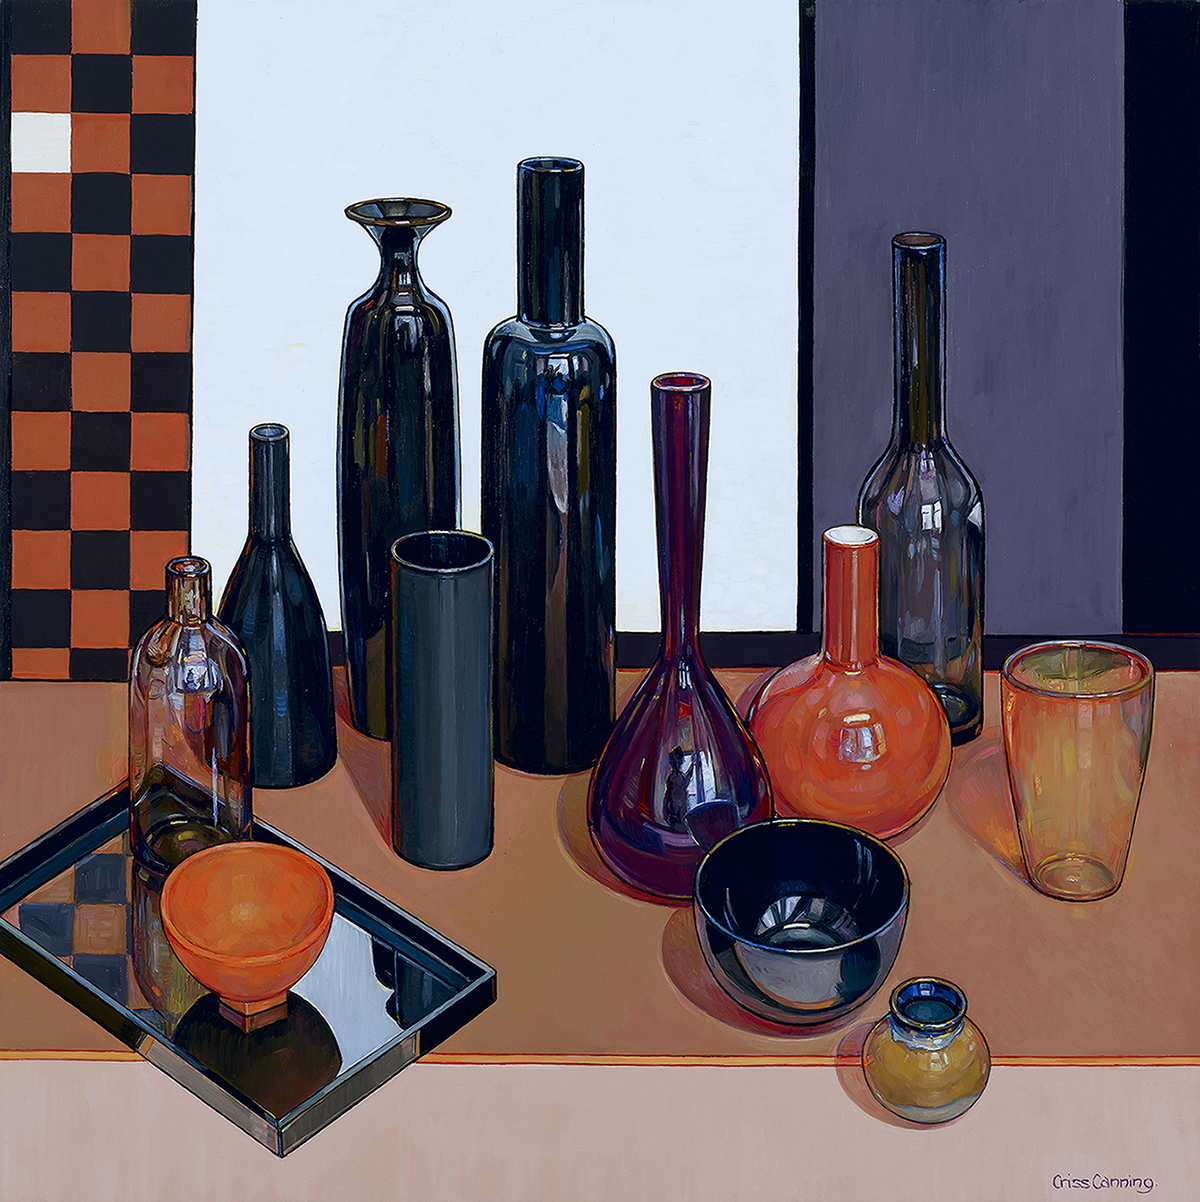 CRISS CANNING, born 1947, Still Life with Thirteen Objects 2022